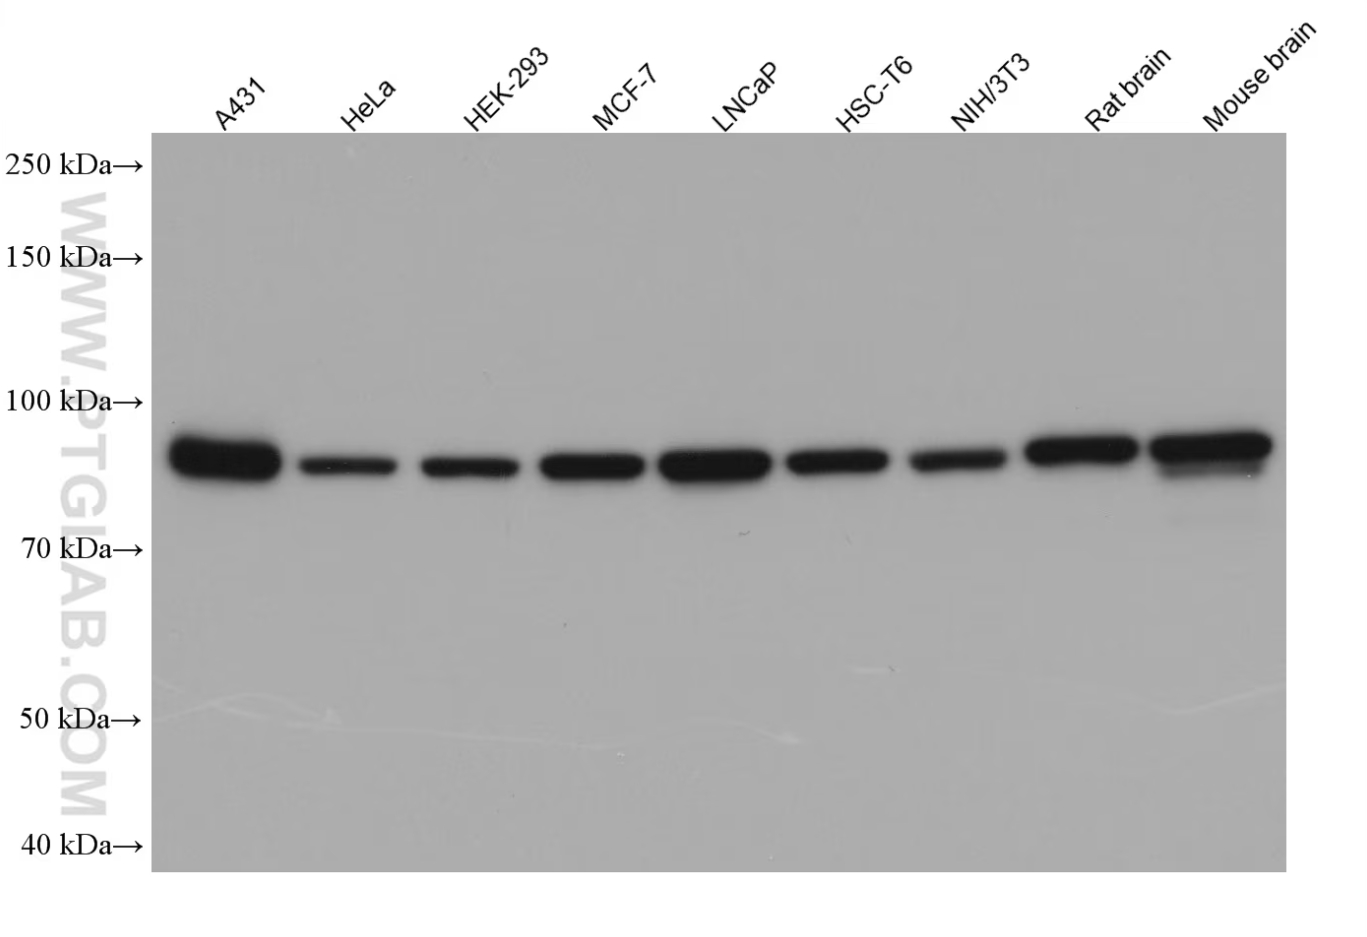 Various lysates were subjected to SDS-PAGE followed by western blot (WB) with anti-beta catenin rabbit polyclonal antibody (51067-2-AP) at a dilution of 1:50000. Multi-rAb HRP-Goat Anti-Rabbit Recombinant Secondary Antibody (H+L) (RGAR001) was used at a dilution of 1:20000 for detection.